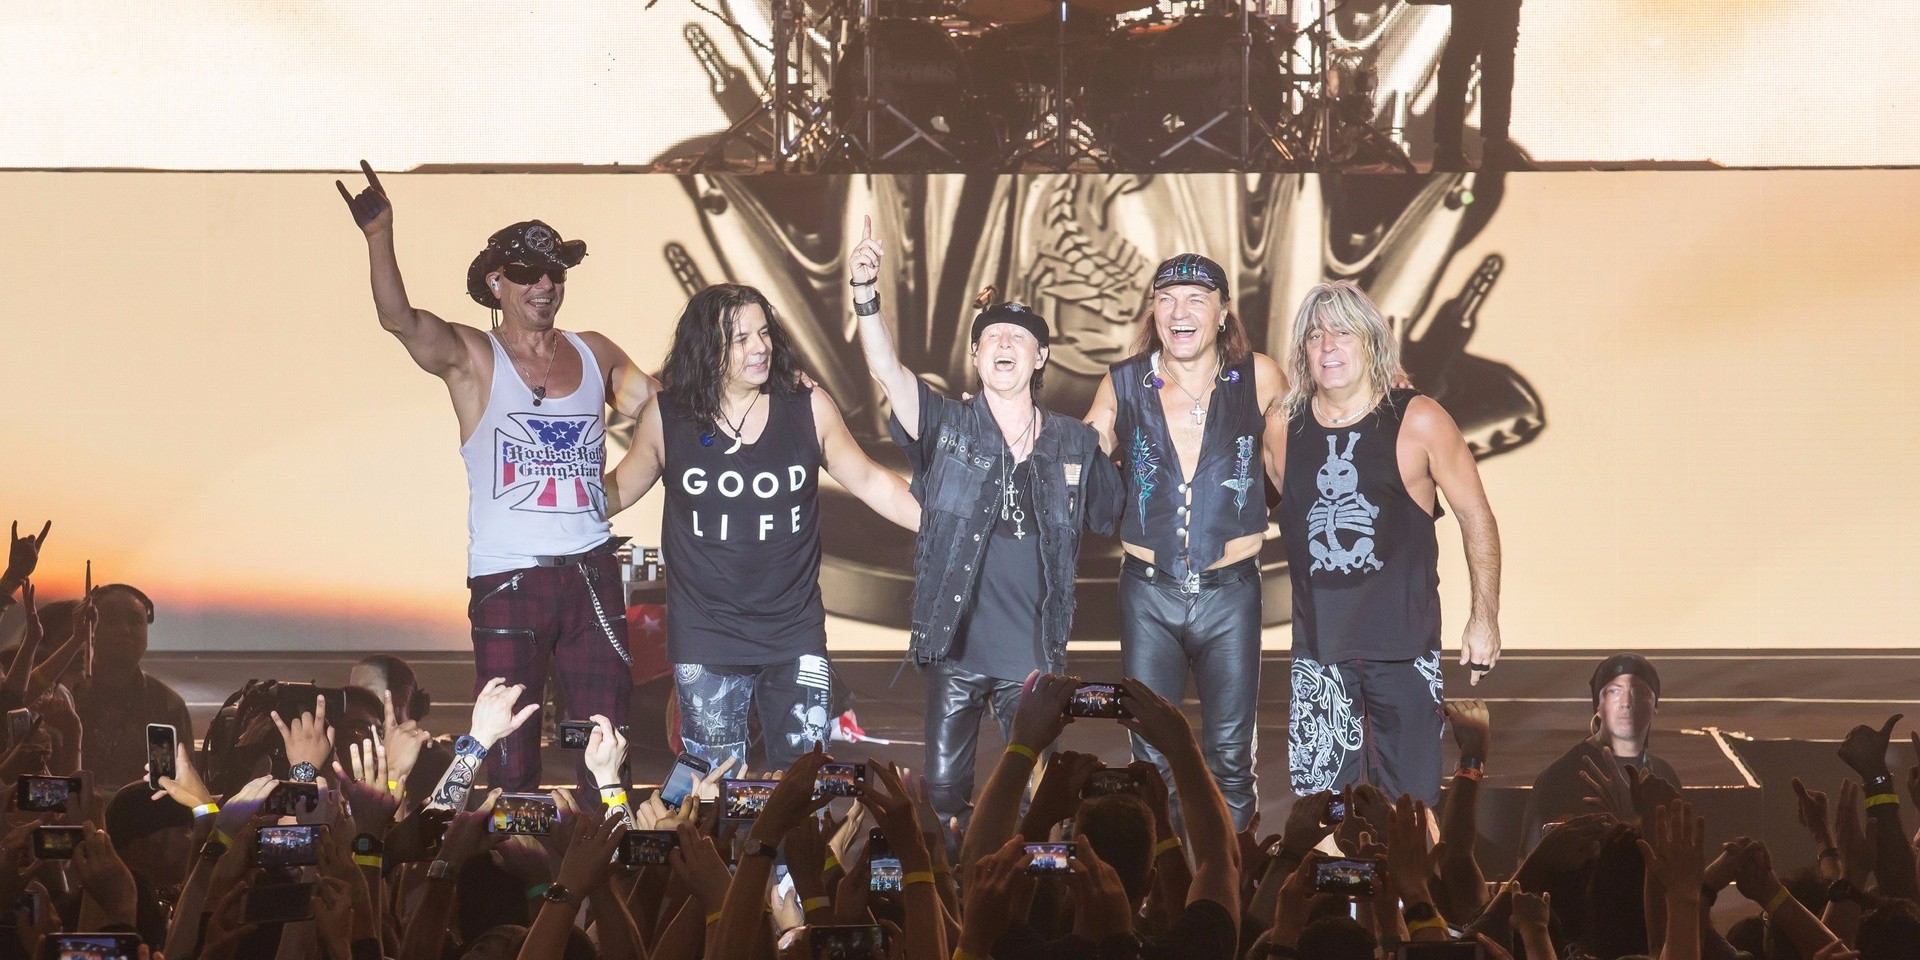 GIG REPORT: Even after 50 years, we're still loving Scorpions